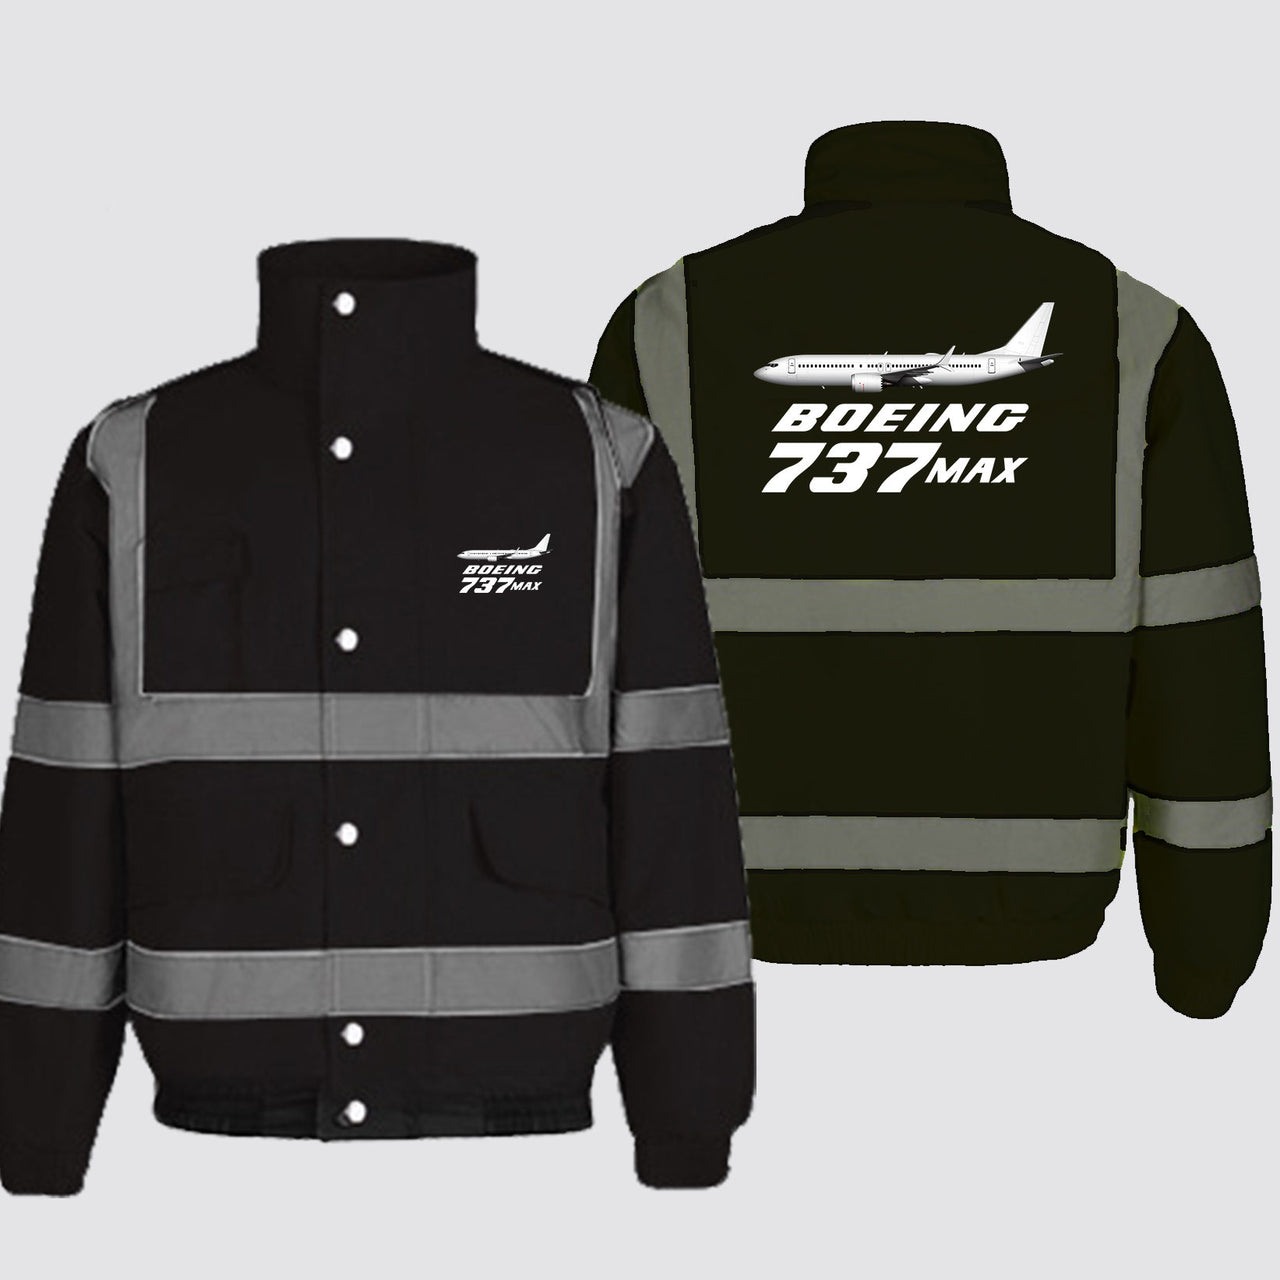 The Boeing 737Max Designed Reflective Winter Jackets